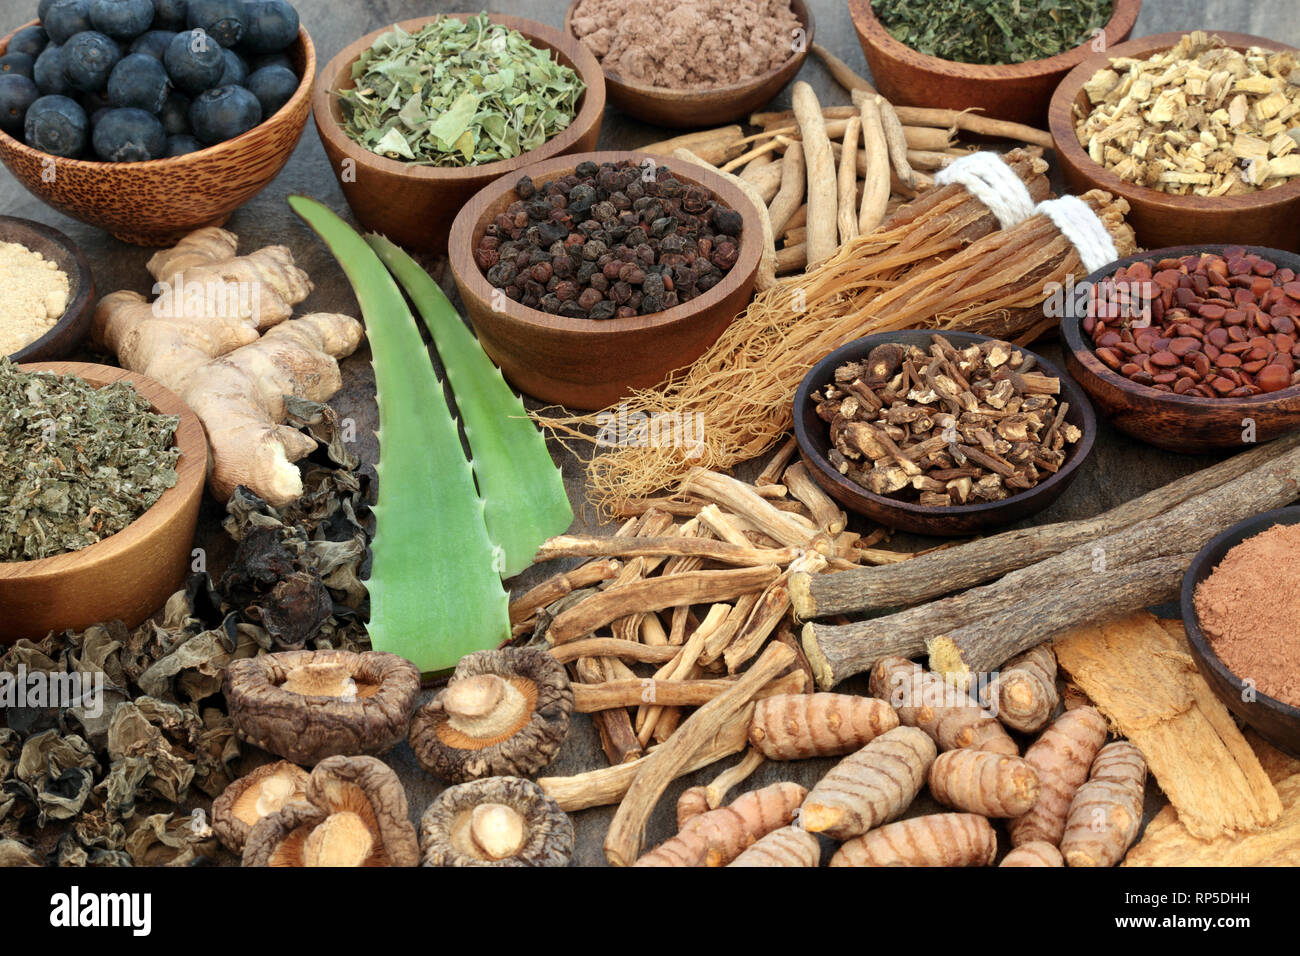 Adaptogen food selection with herbs, spice, fruit and supplement powders. Used in herbal medicine to help the body resist the effects of stress. Stock Photo